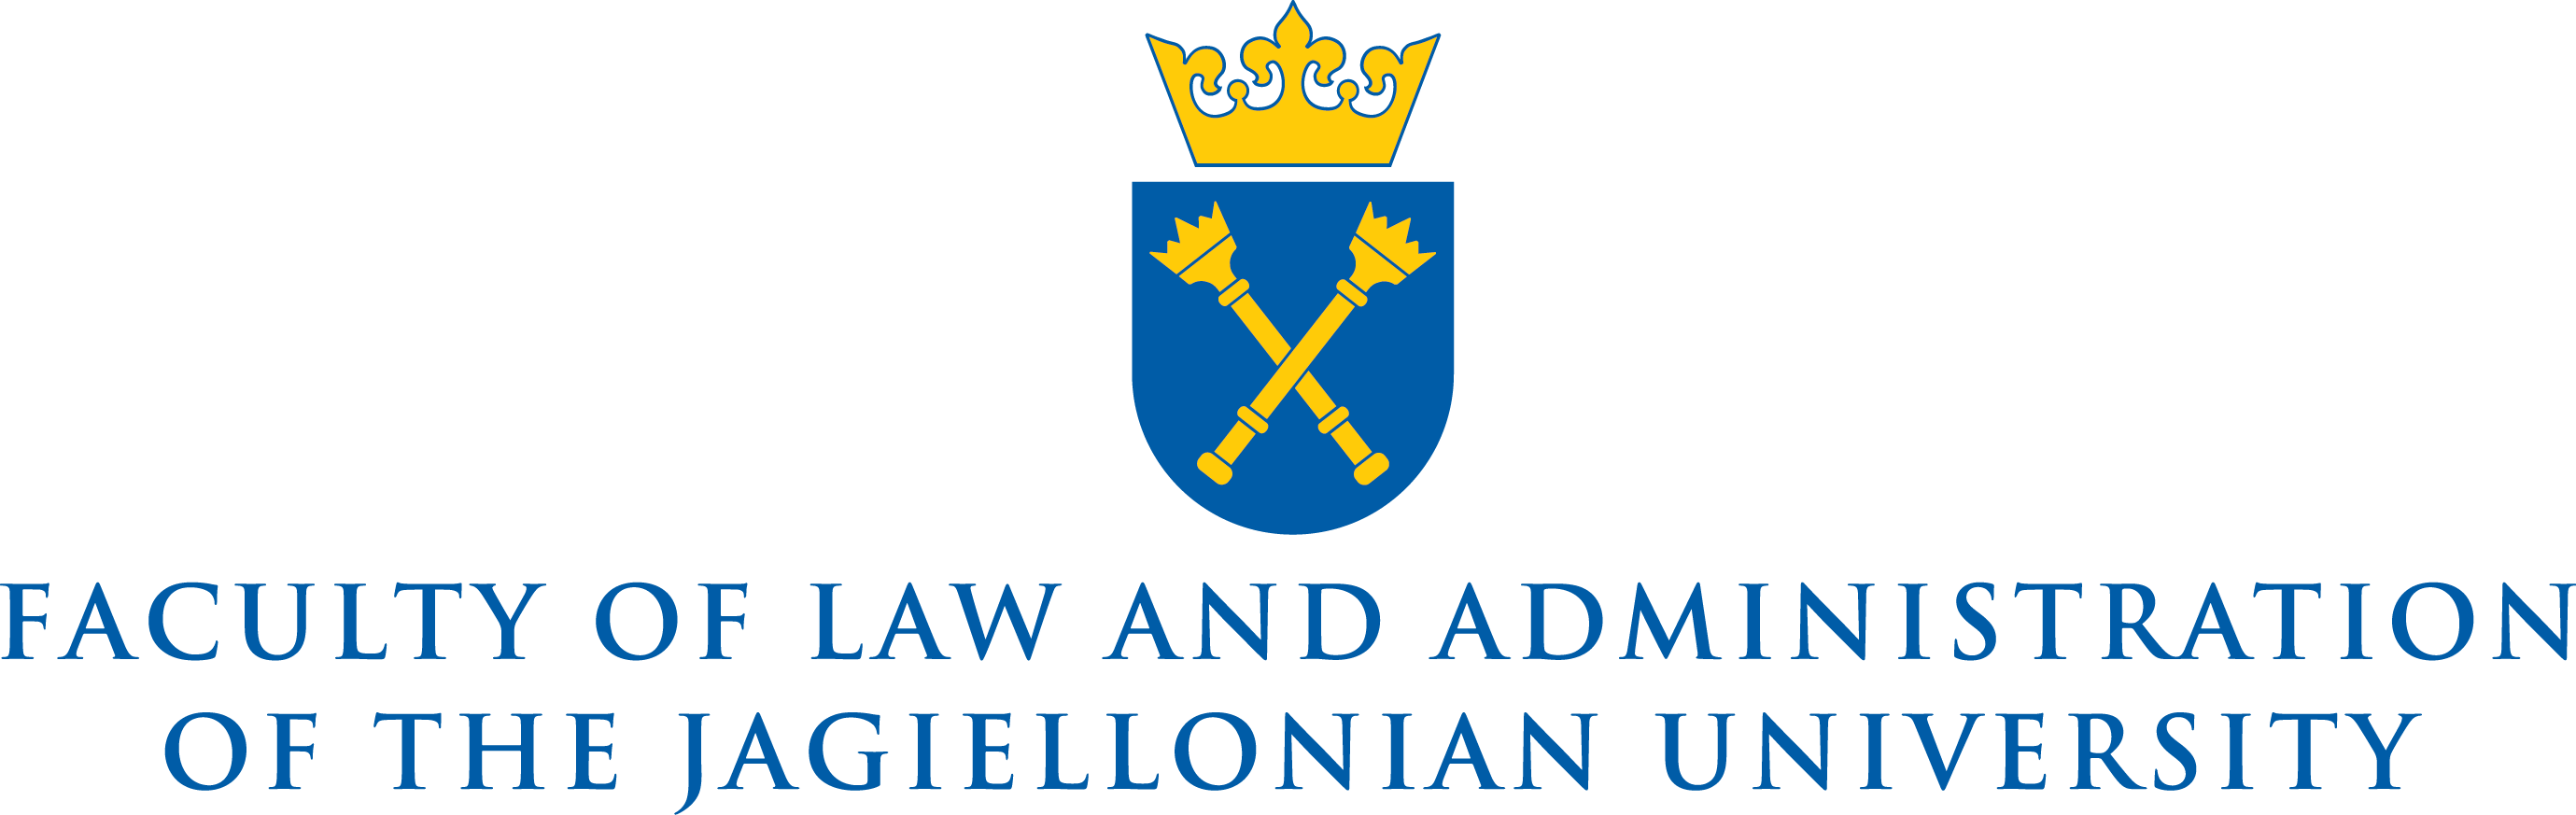 logo Faculty of Law and Administration of the Jagiellonian University